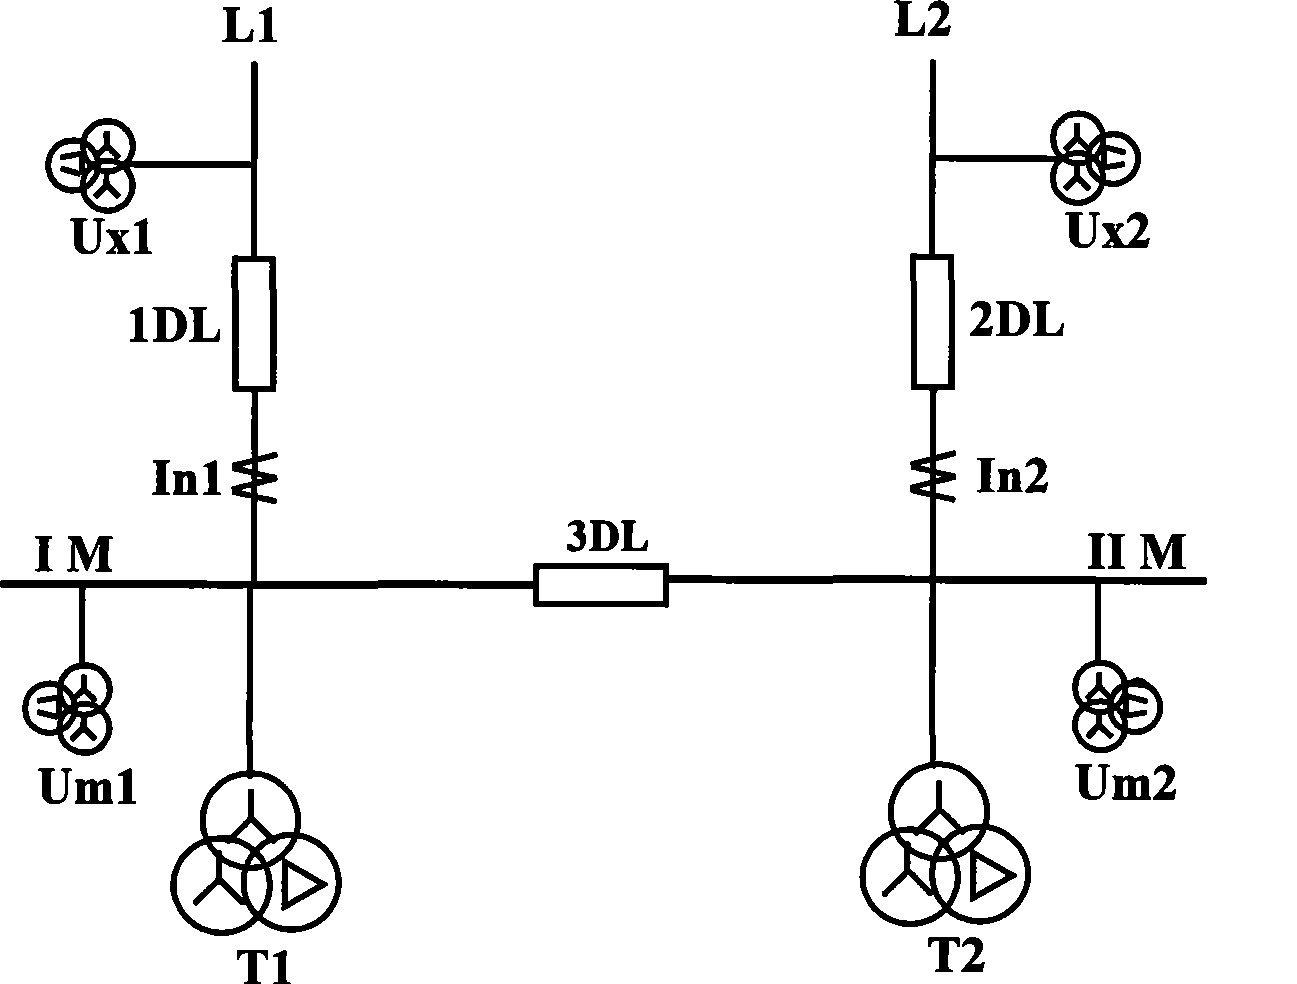 Self-adaptive standby power source self-throwing scheme for transforming plant lead-in circuit breaker